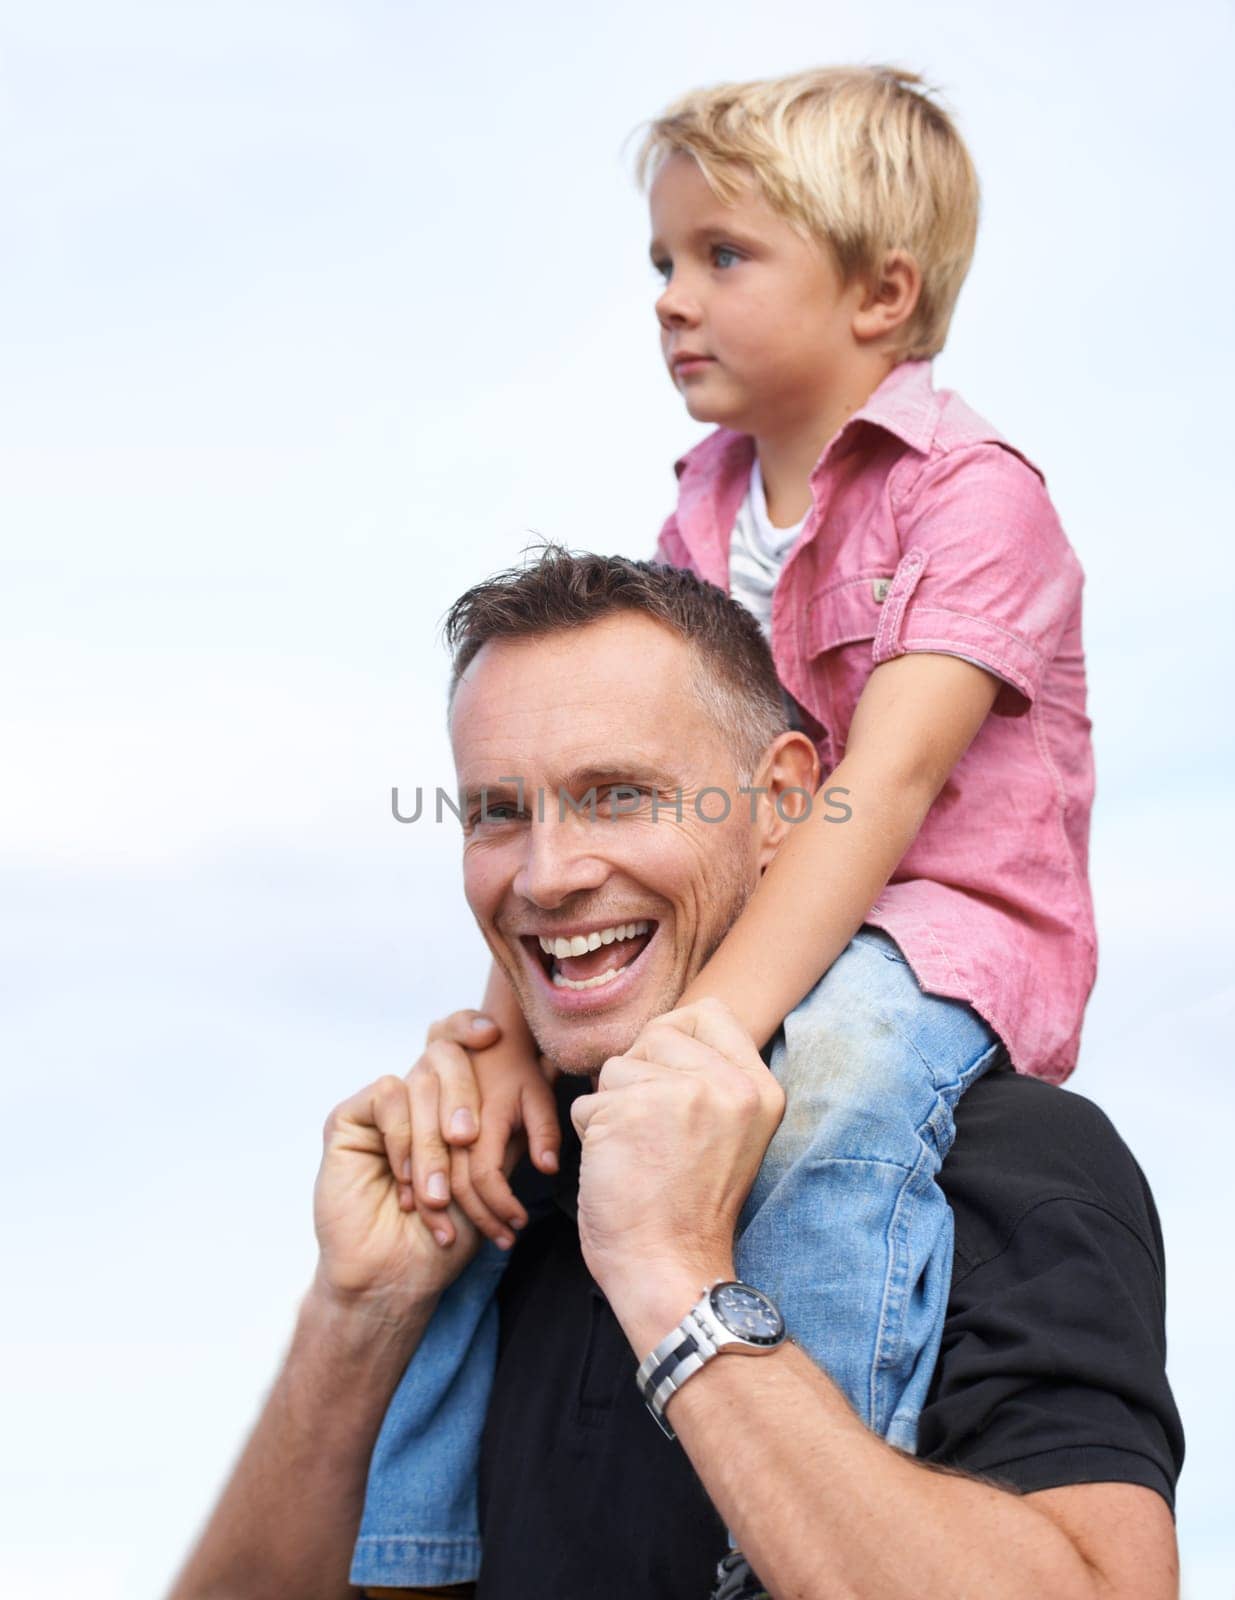 Love, portrait and piggyback by father and son outdoor for fun, bonding or travel adventure. Happy family, support or parent with boy kid outside for shoulder ride, games or care, security or journey by YuriArcurs